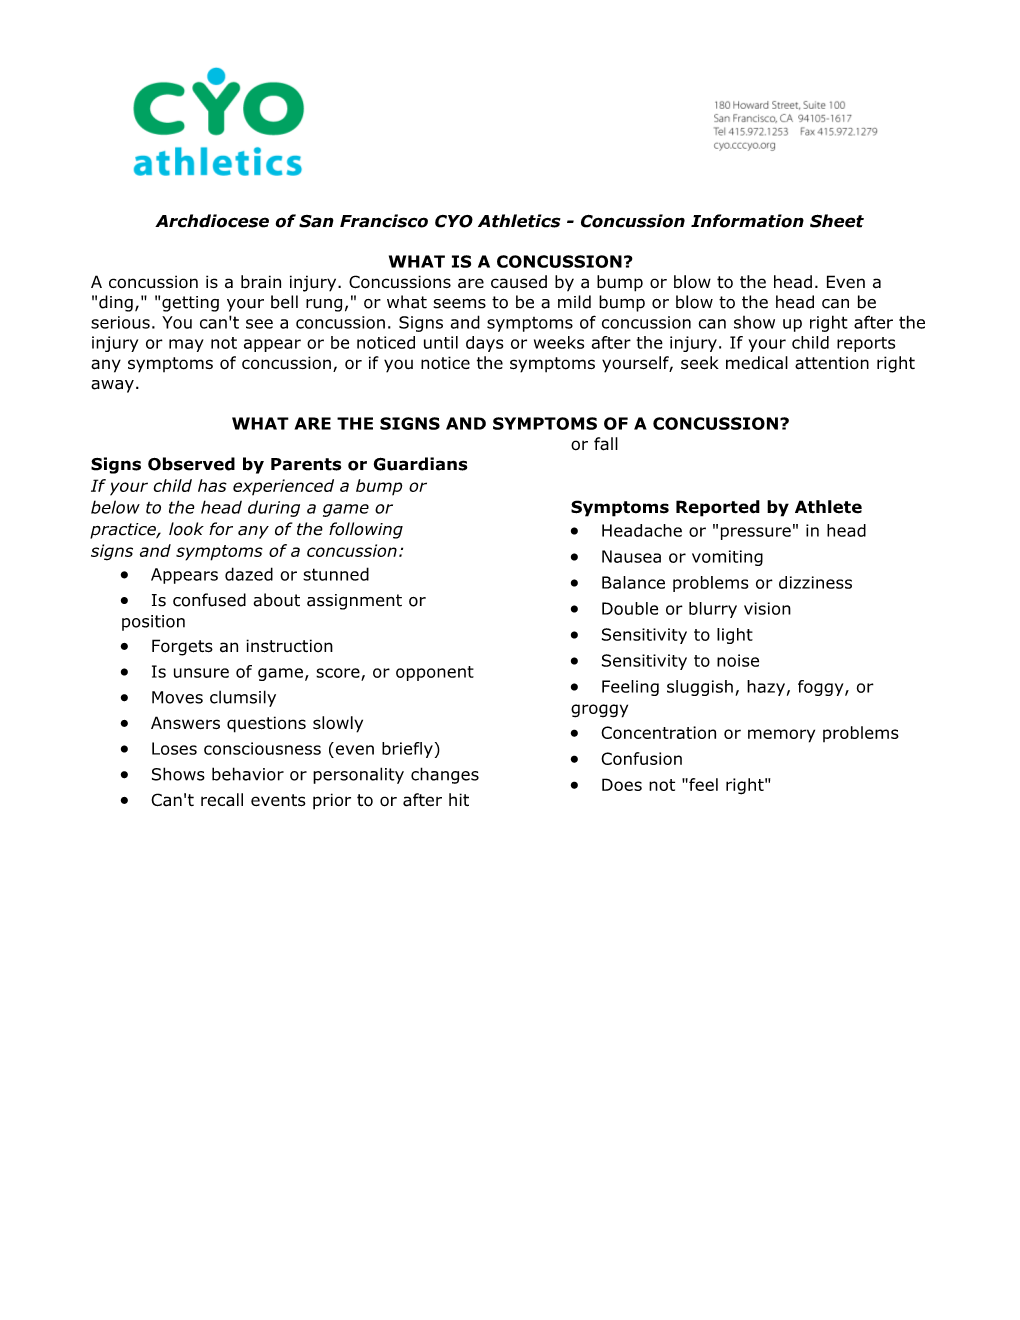 Archdiocese of San Francisco CYO Athletics - Concussion Information Sheet